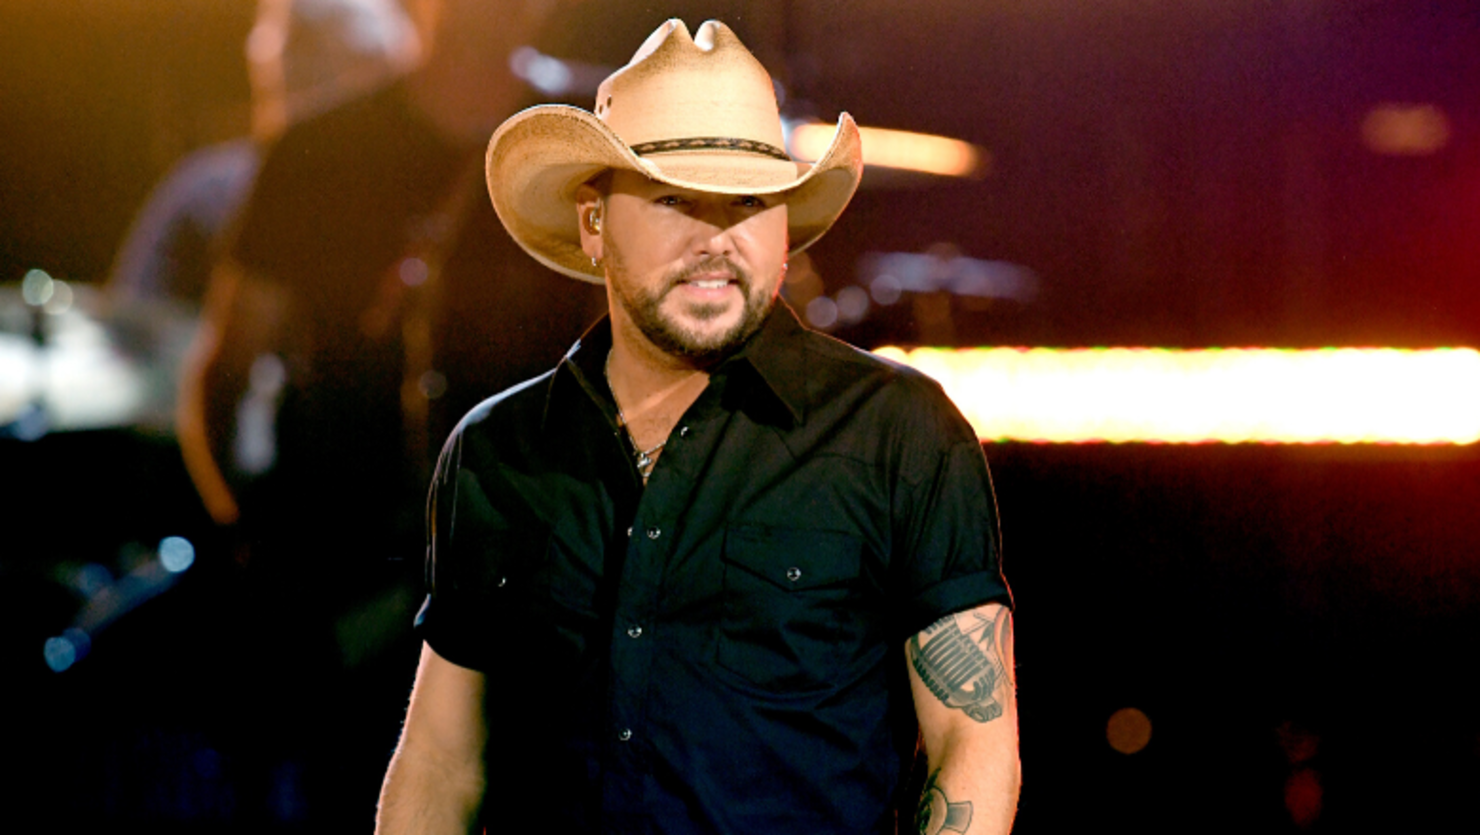 Jason Aldean Surprises Daughter Keeley With Prom At Home During Quarantine